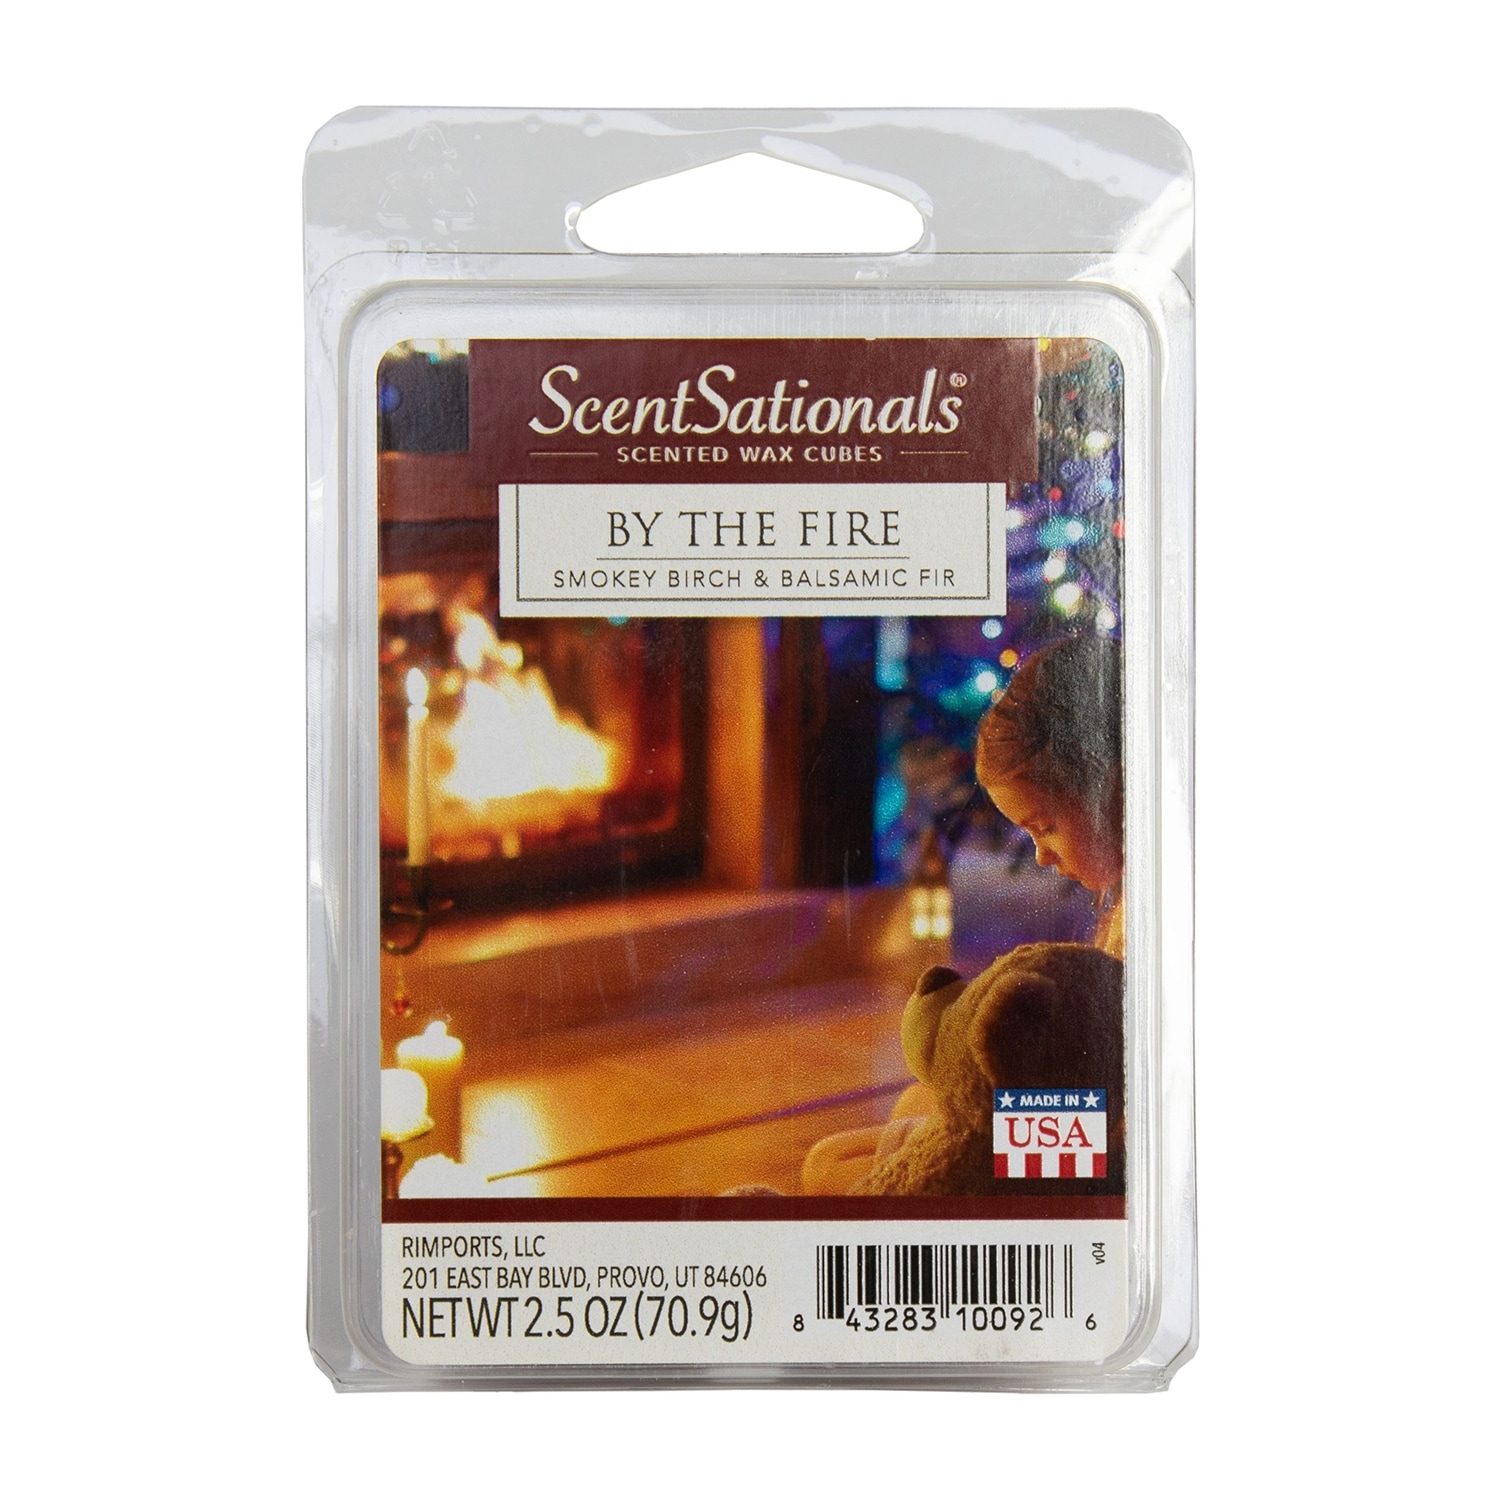 ScentSationals 2.5 ounce Scented Wax Cubes Candle Melts New - You